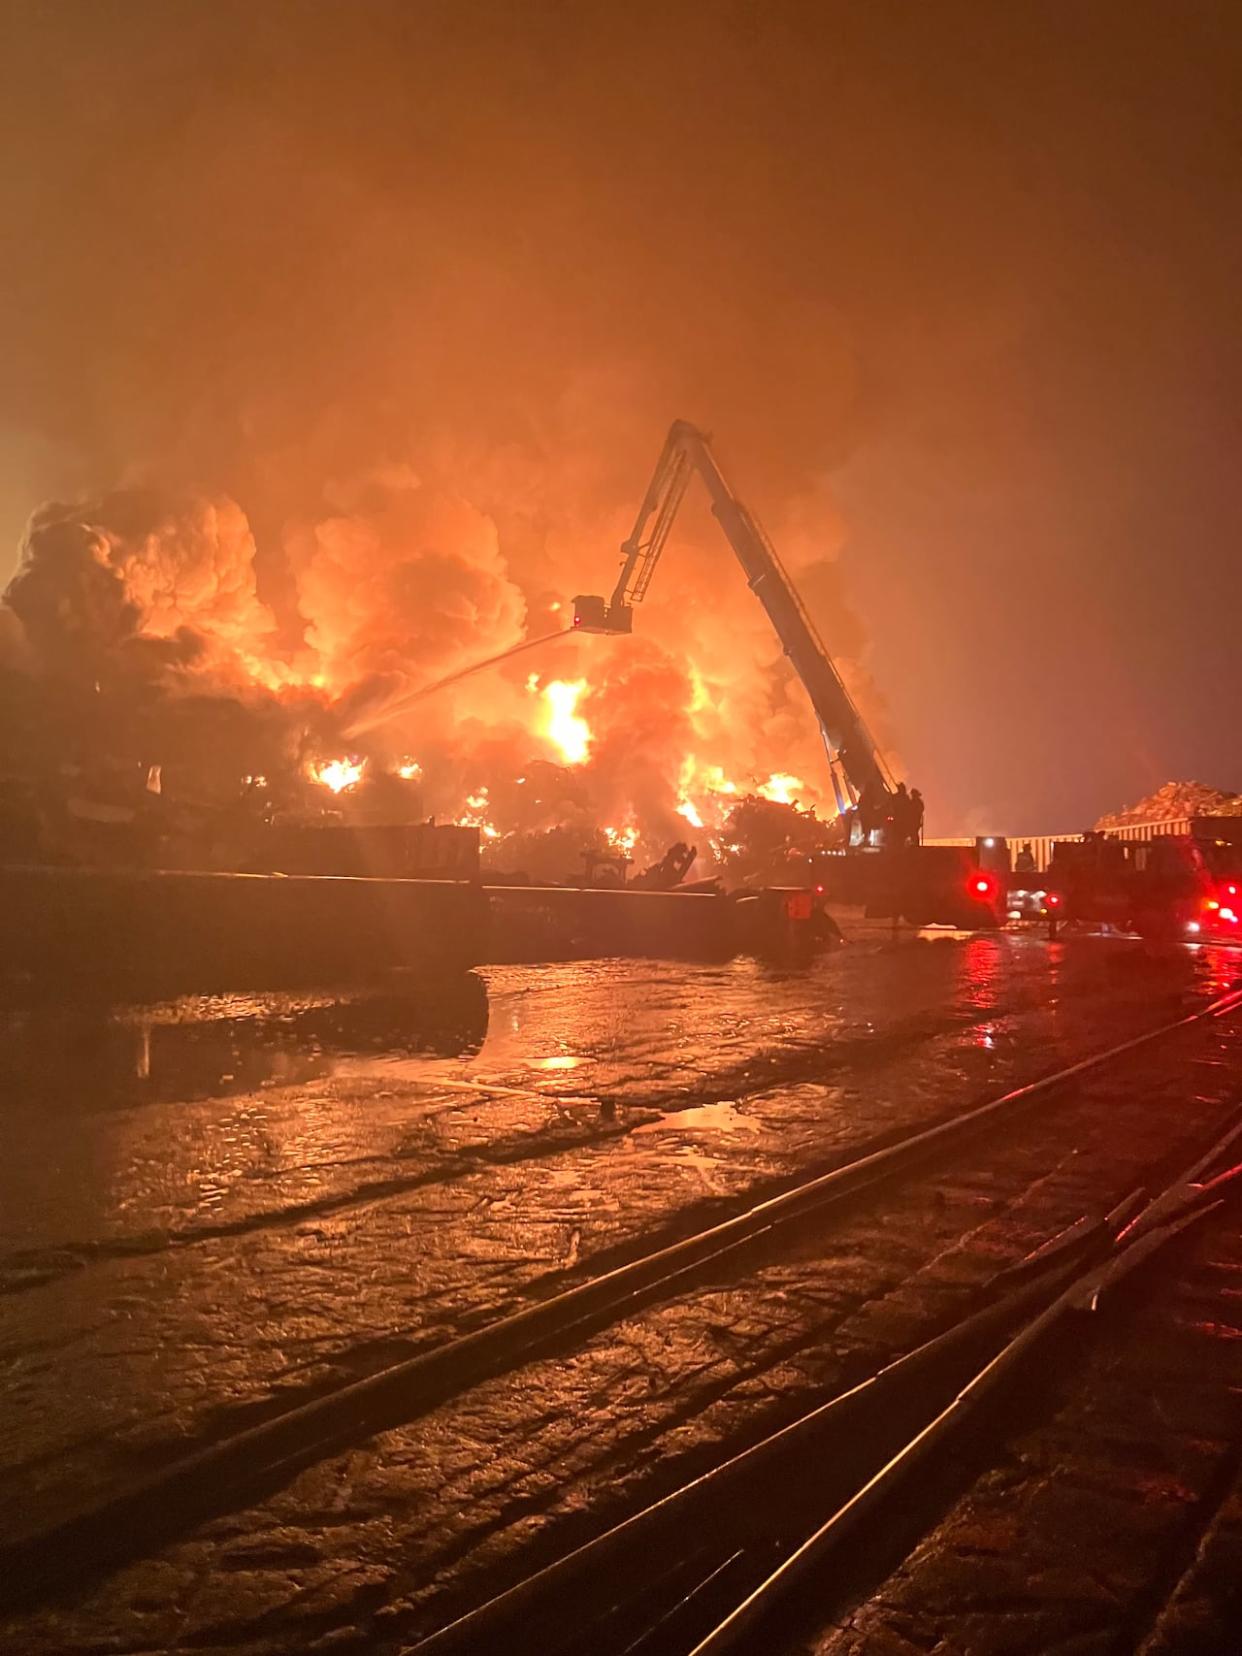 Piles of scrap metal at AIM's west side operation caught fire at around 1 a.m. on Sept. 14. (Submitted by Ed Moyer - image credit)